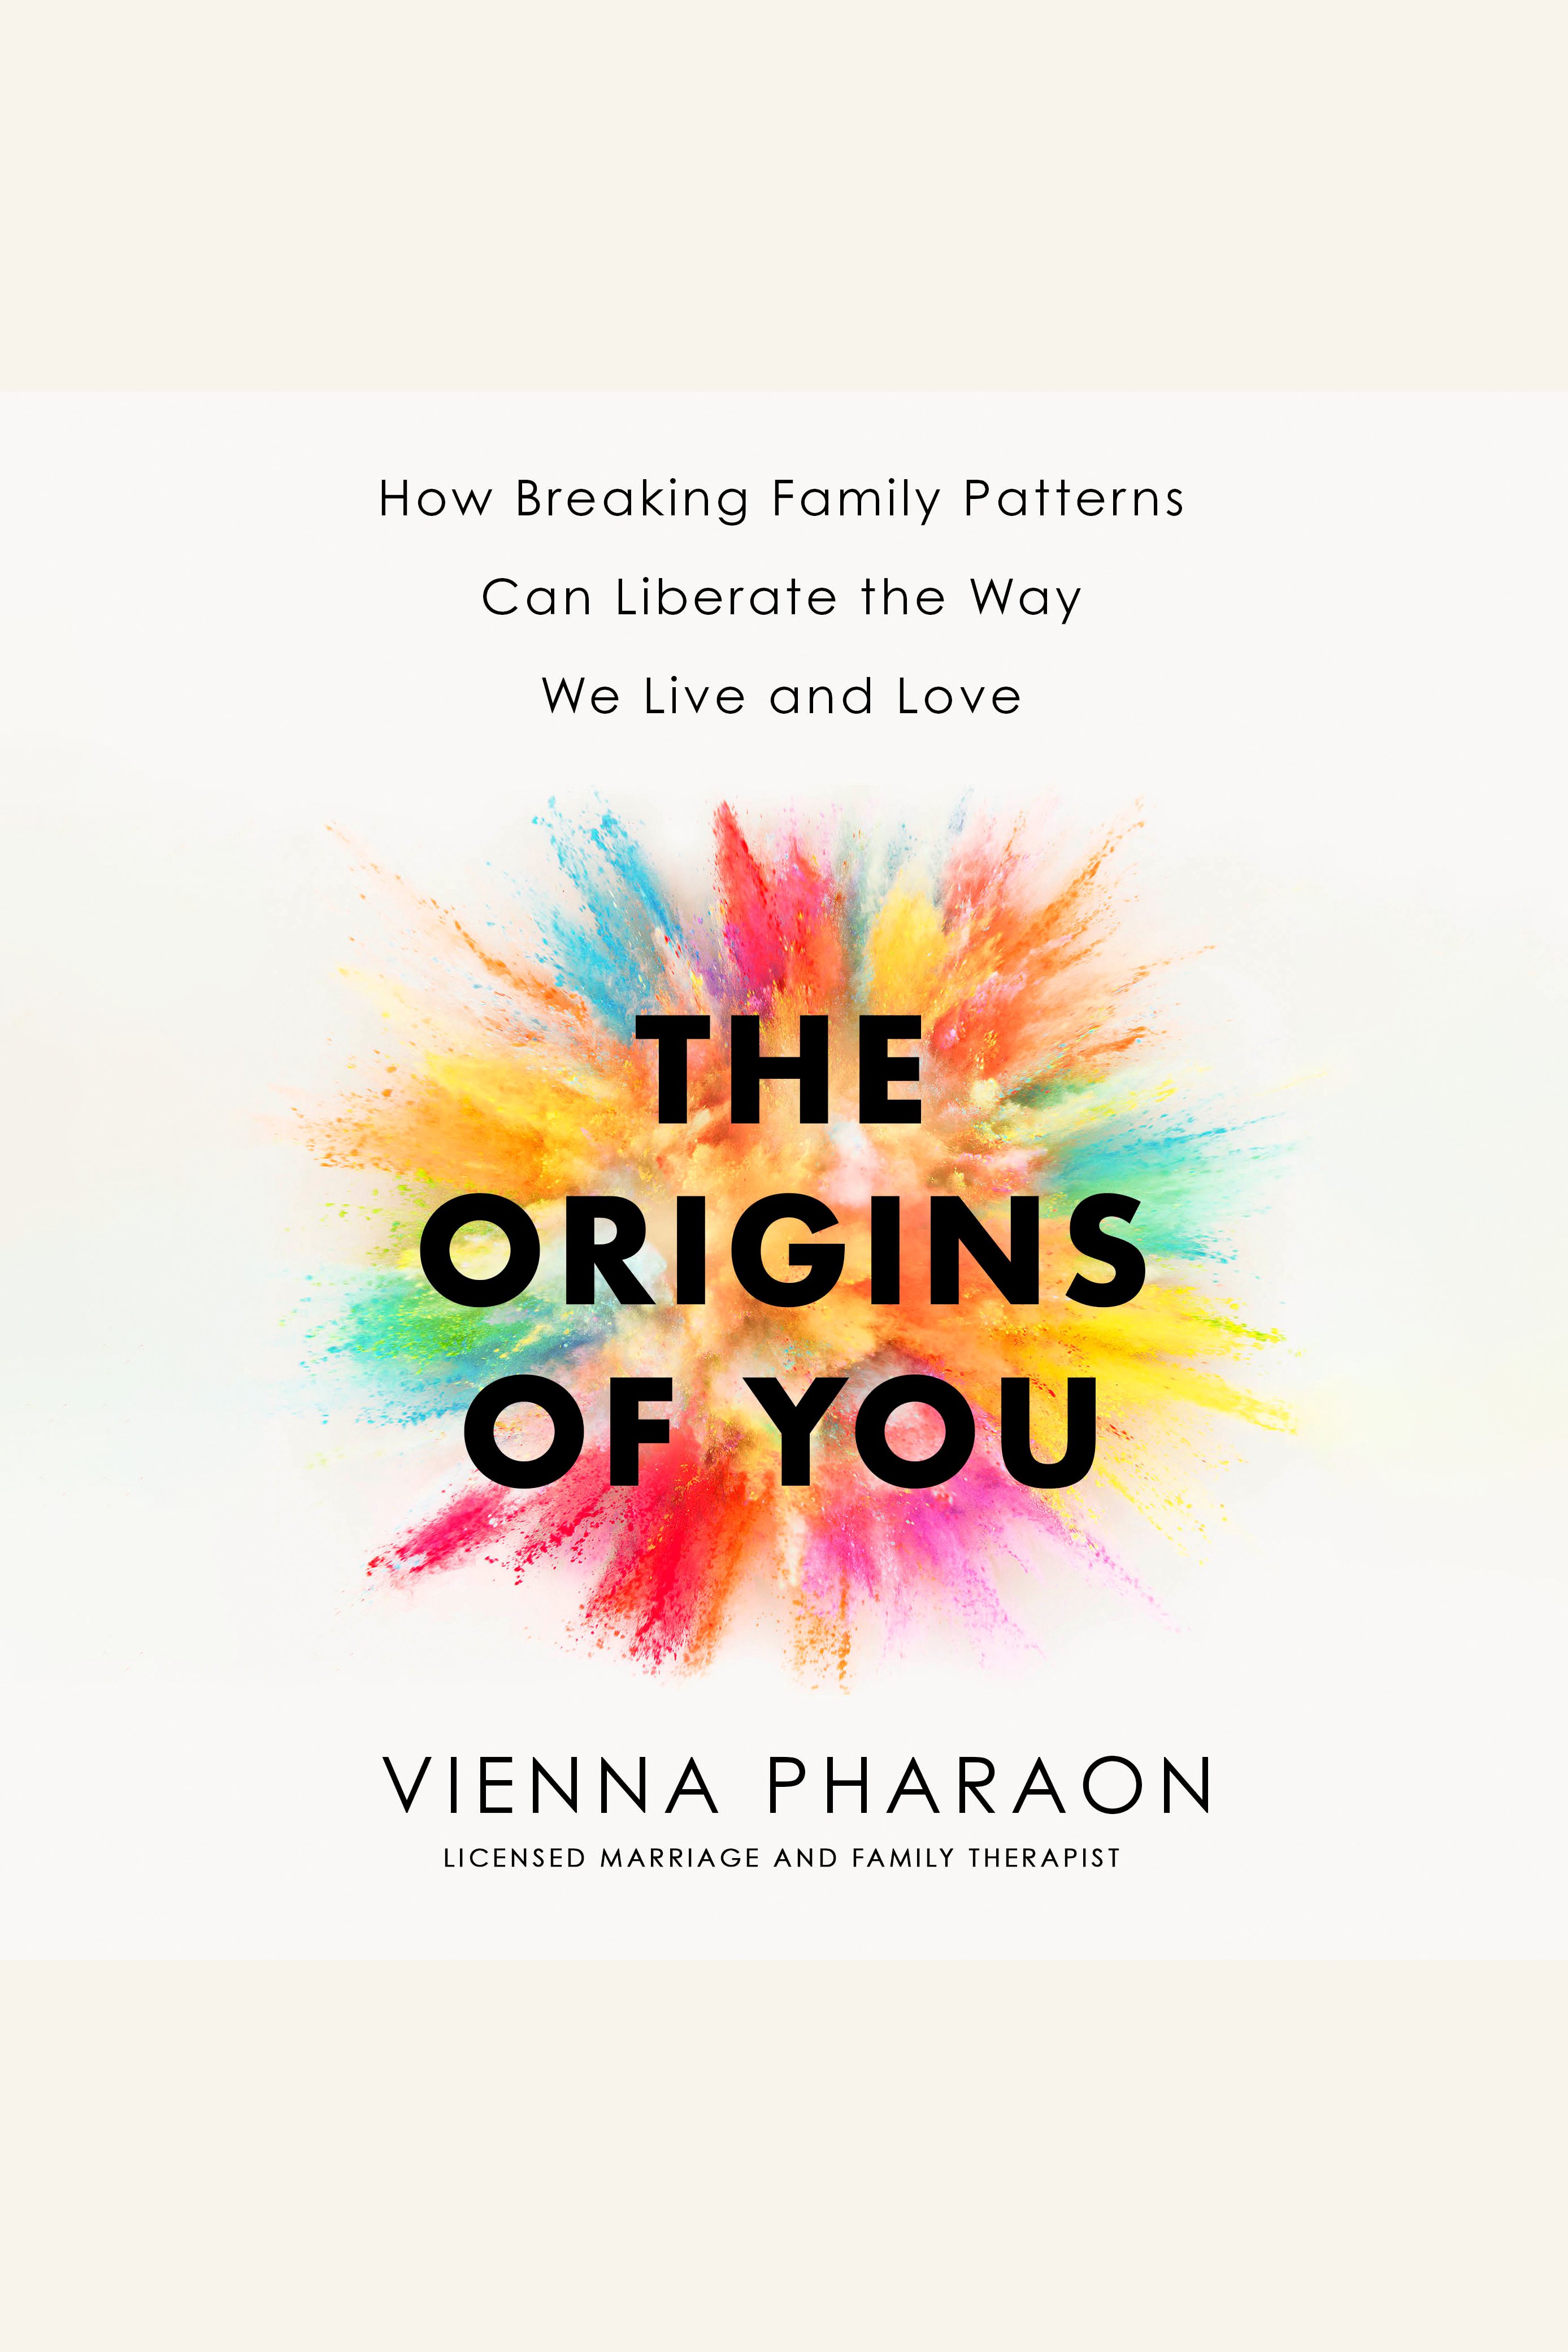 The Origins of You How Breaking Family Patterns Can Liberate the Way We Live and Love